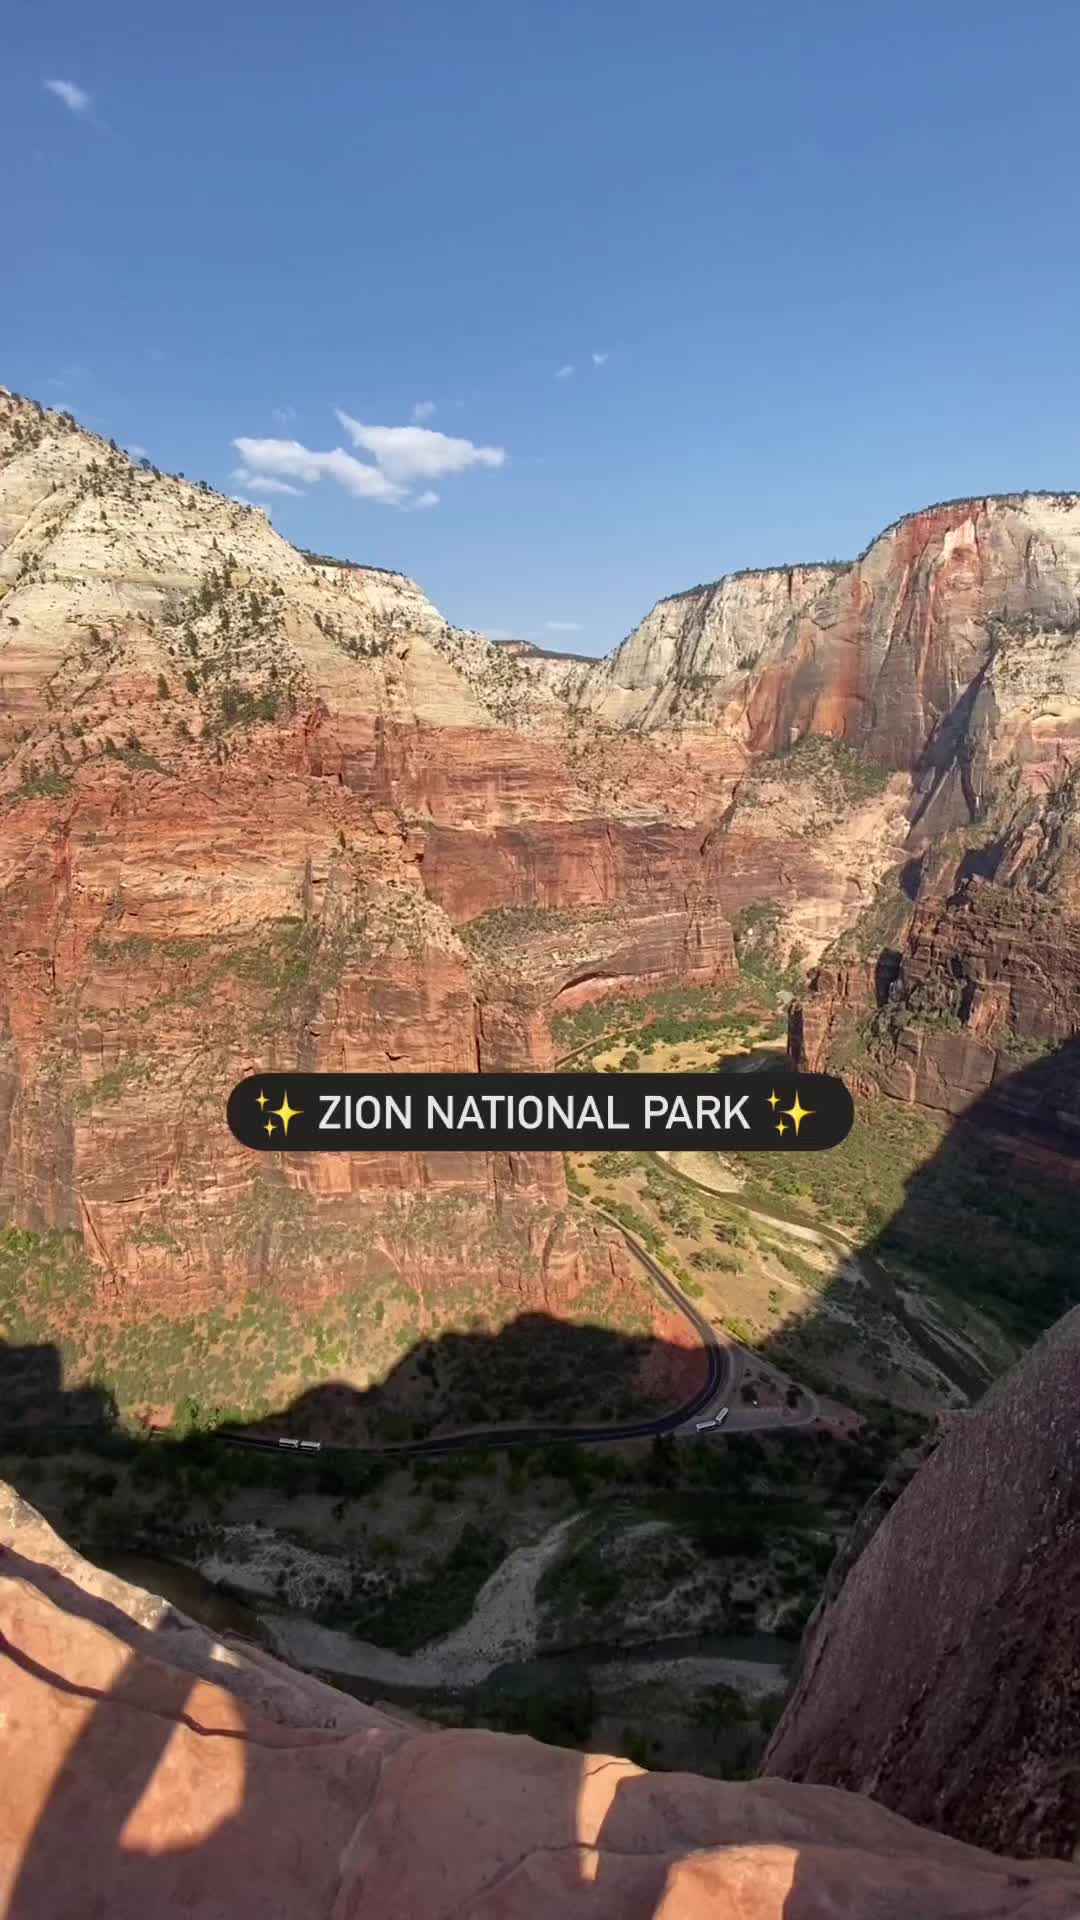 ✨ Save this post for your next Zion National Park trip! 

📸 One of the most popular parks in all of the United States and with good reason. Zion National Park is a dream bucket list destination that needs to be on everyone’s list. Crowds are a huge topic here but if you visit during the shoulder seasons and hike sunrise/sunset you should find this helps ease the crowds a lot. Here are some must see spots when visiting! 

📍Angels Landing (permit required) 
📍The Narrows 
📍Kolob Canyons (escape crowds) 
📍Canyon Overlook Trail 
📍Pa’rus Trail
📍Watchman Trail
📍Explore the city of Springdale 
📍Zion Canyon Scenic Drive or rent bikes
📍Emerald Pools
📍The Subway (permit required)
📍Checkerboard Mesa
📍Observation Point Via East Mesa
📍Kanarra Falls (reservation needed)

🚙Other areas nearby to explore if you have additional time! 

📌 Bryce Canyon National Park
📌 Coral Pink Sand Dunes State Park
📌 Grand Staircase-Escalante 
📌 Horseshoe Bend
📌 Lake Powell
📌 Sand Hollow State Park
📌 Snow Canyon State Park 

📸 Come join along as we travel the National Parks giving our best tips and itineraries!
@thenationalparktravelers 

#zionnationalpark #visitutah #utahhiking #angelslanding #thenarrows #nationalpark #springdaleutah #utah #hikingadventures